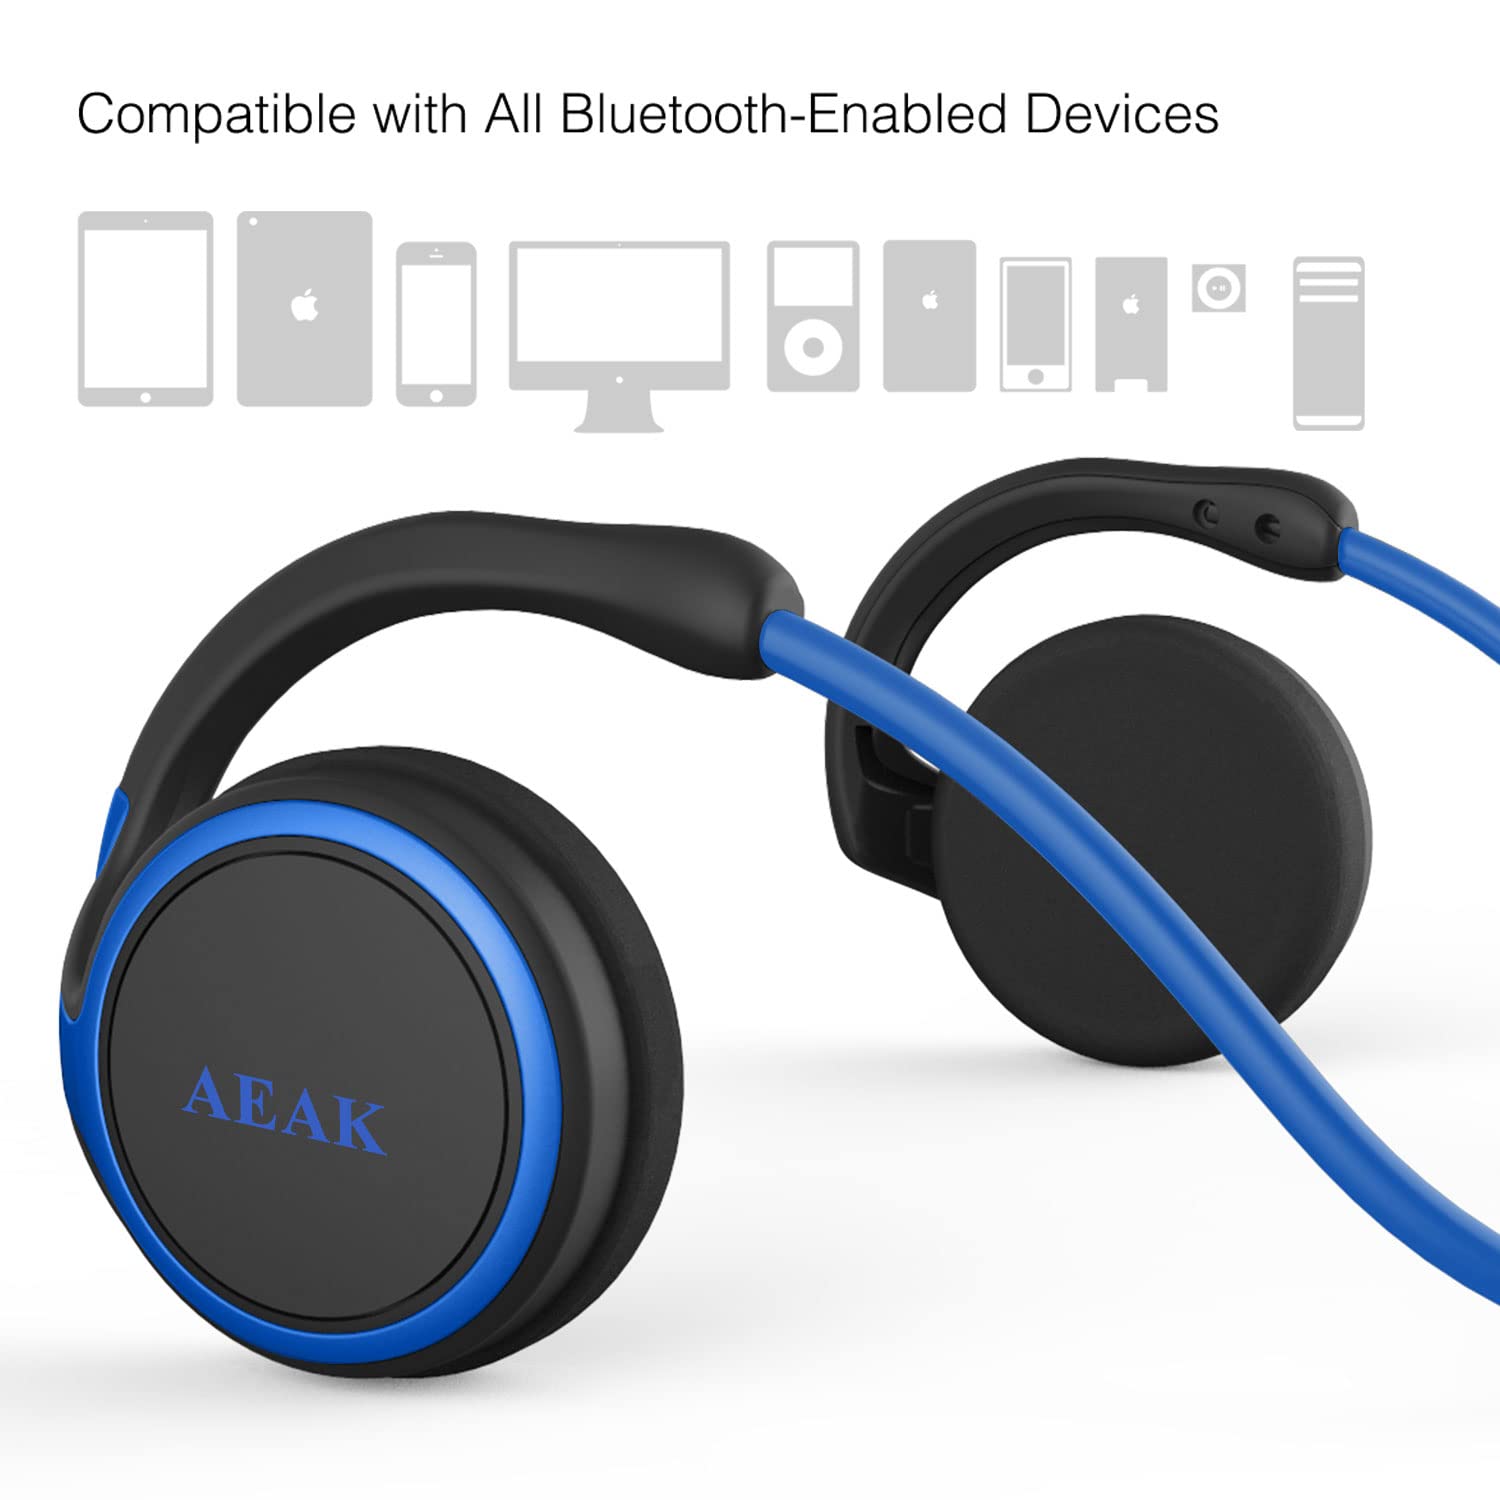 Bluetooth Wireless Running Headphones, Zero Pressure Design Earphone with HiFi Stereo Sound, Clear Voice Capture Technology, Foldable Pocket Size for Gym/Yoga/Travel(blue)